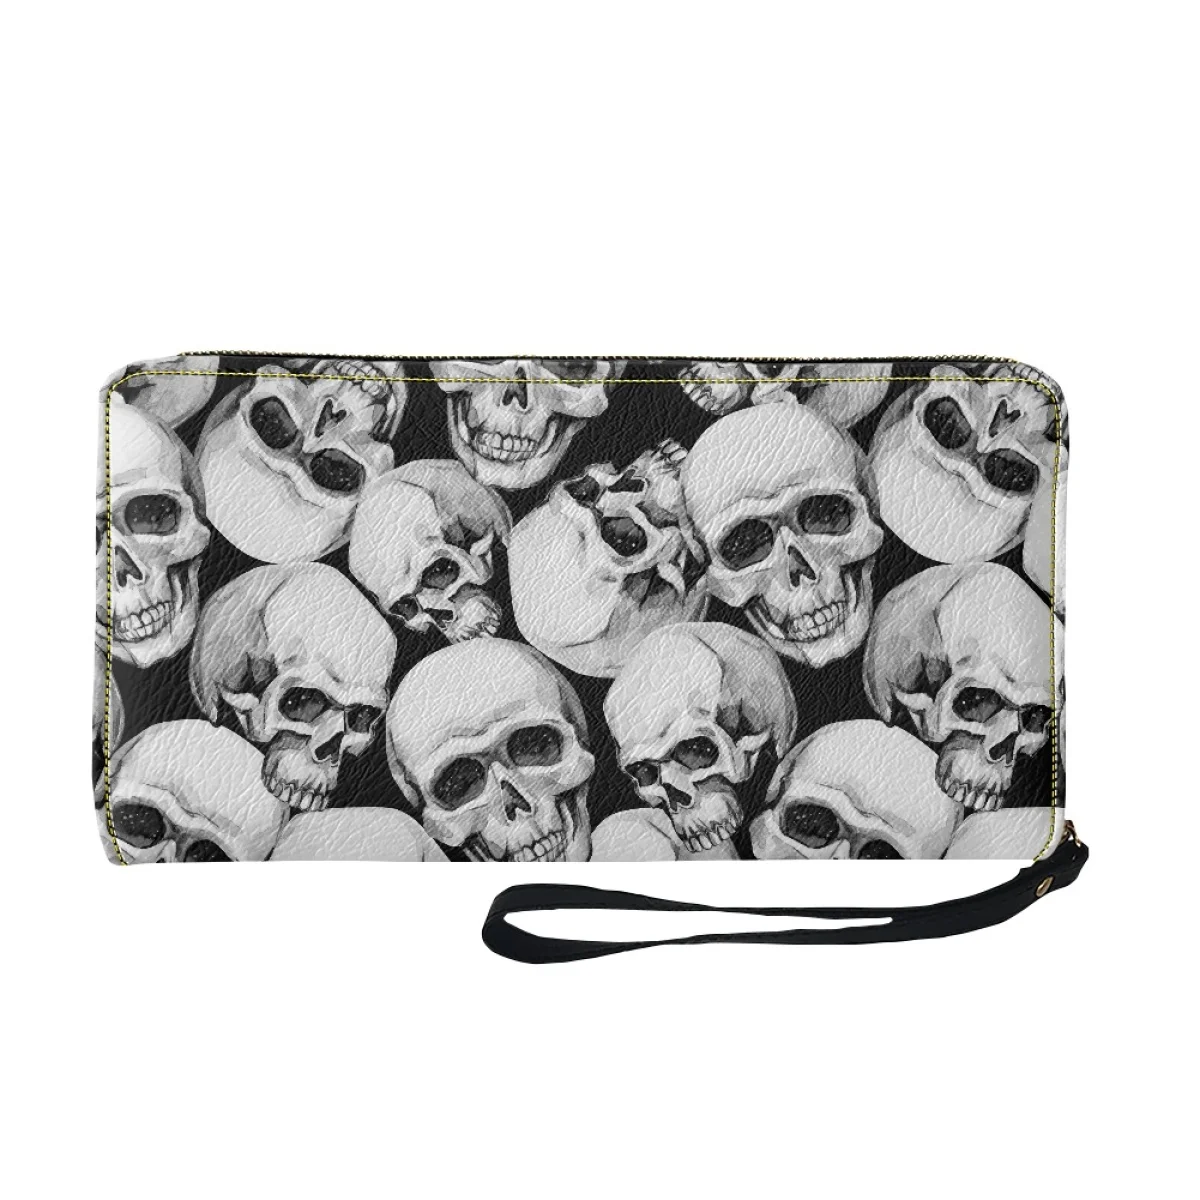 Skull Print Clutch Wallet For Women Luxury Brand Wallet Pu Leather Lightweight With StrapSlim Wallet Carteras Para Mujer